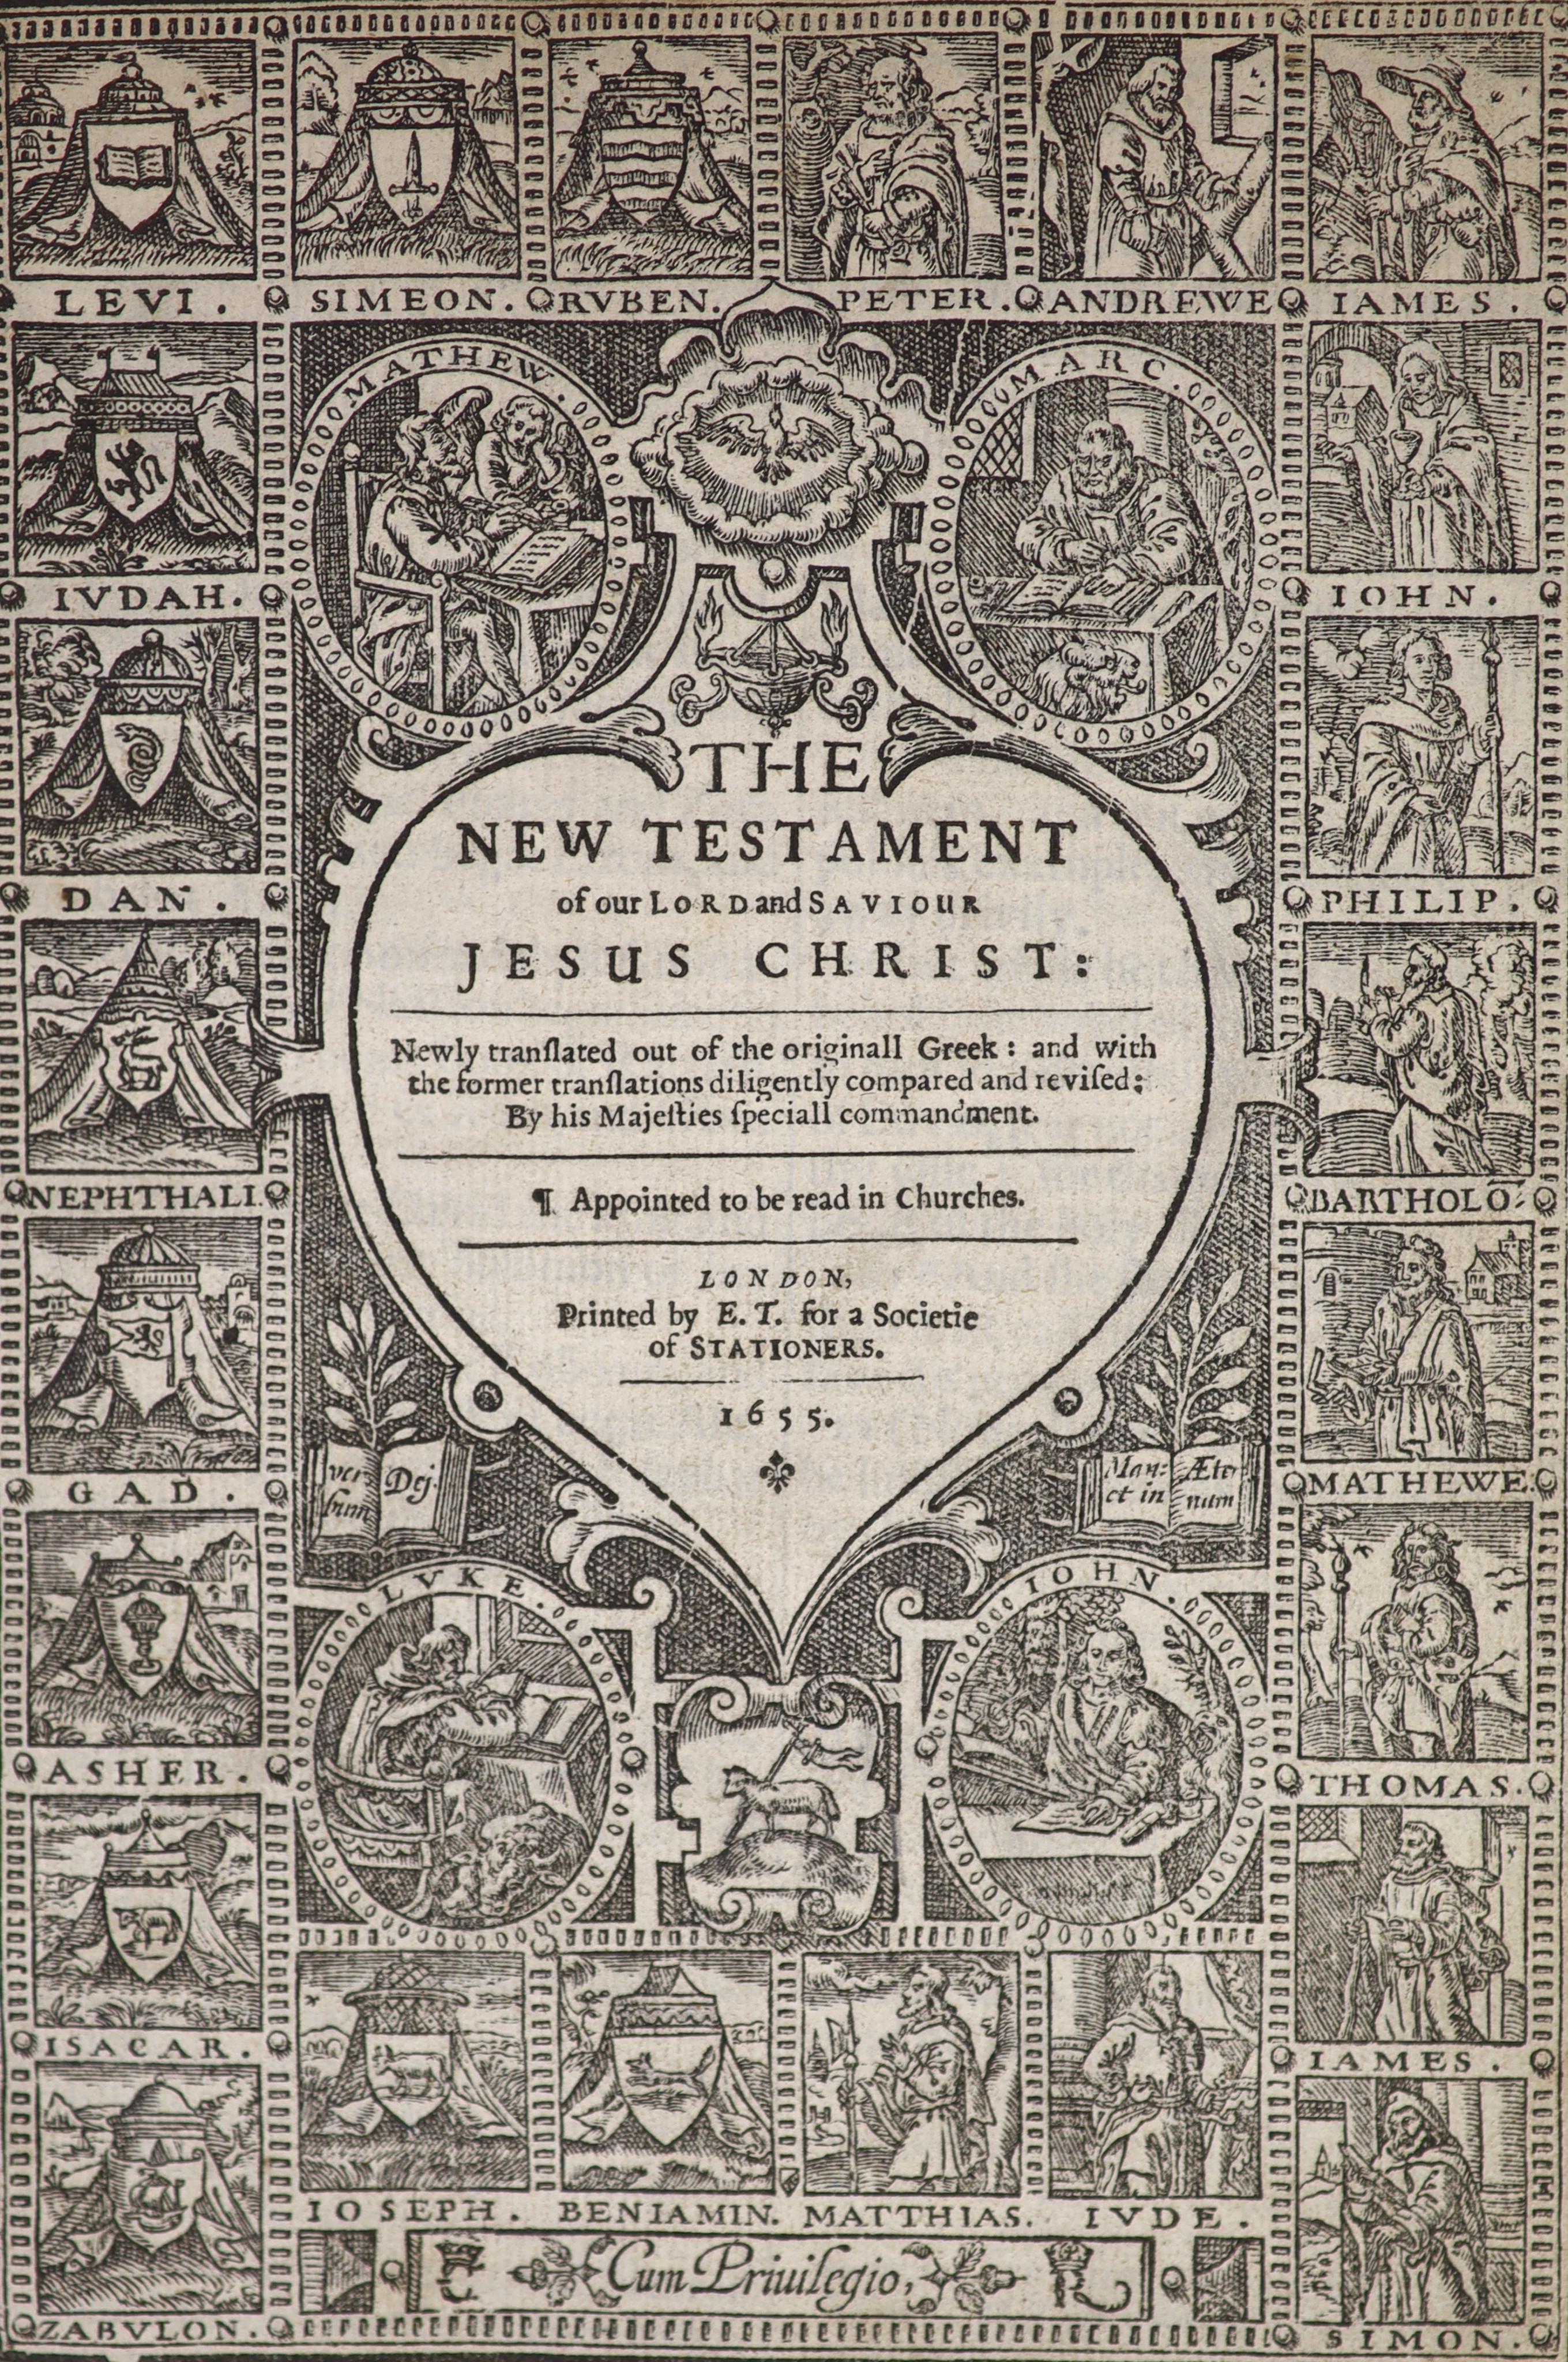 The Bible in English - The New Testament, 4to, Victorian carved oak binding, printed by E.T. [Evan Tyler] for a Societie of Stationers, London, 1655